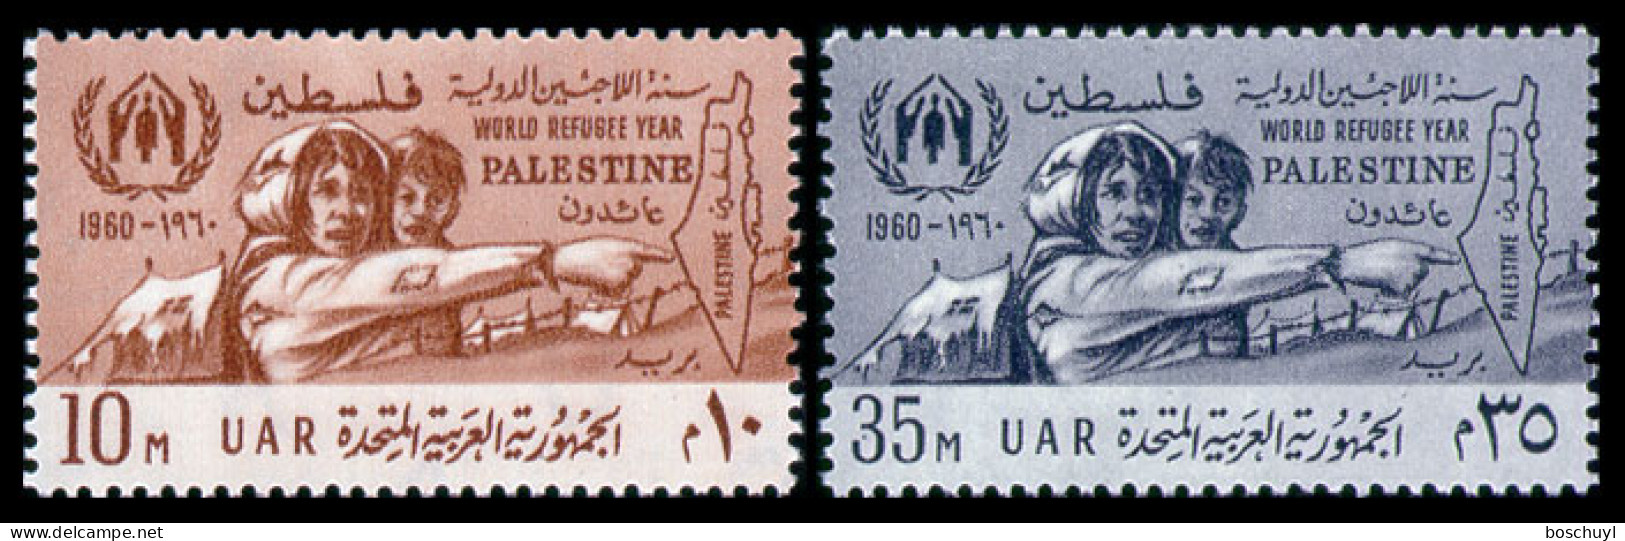 Palestine, Egyptian Occupation 1960, World Refugee Year, WRY, United Nations, MNH, Michel 109-110 - Réfugiés